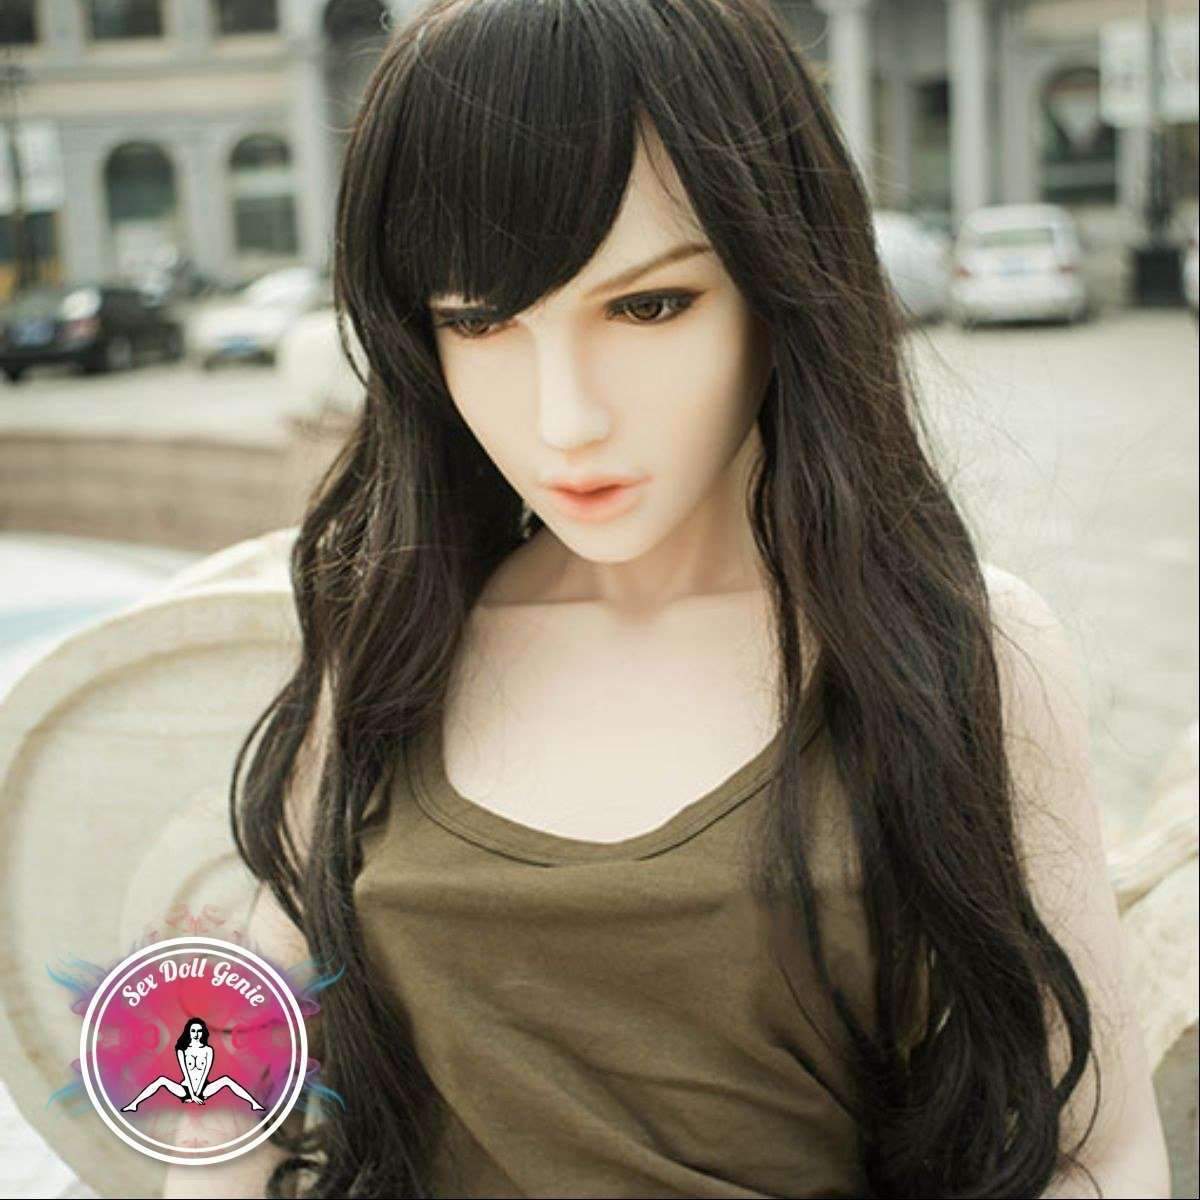 DS Doll - 163Plus - Sandy Head - Type 1 D Cup Silicone Doll-5